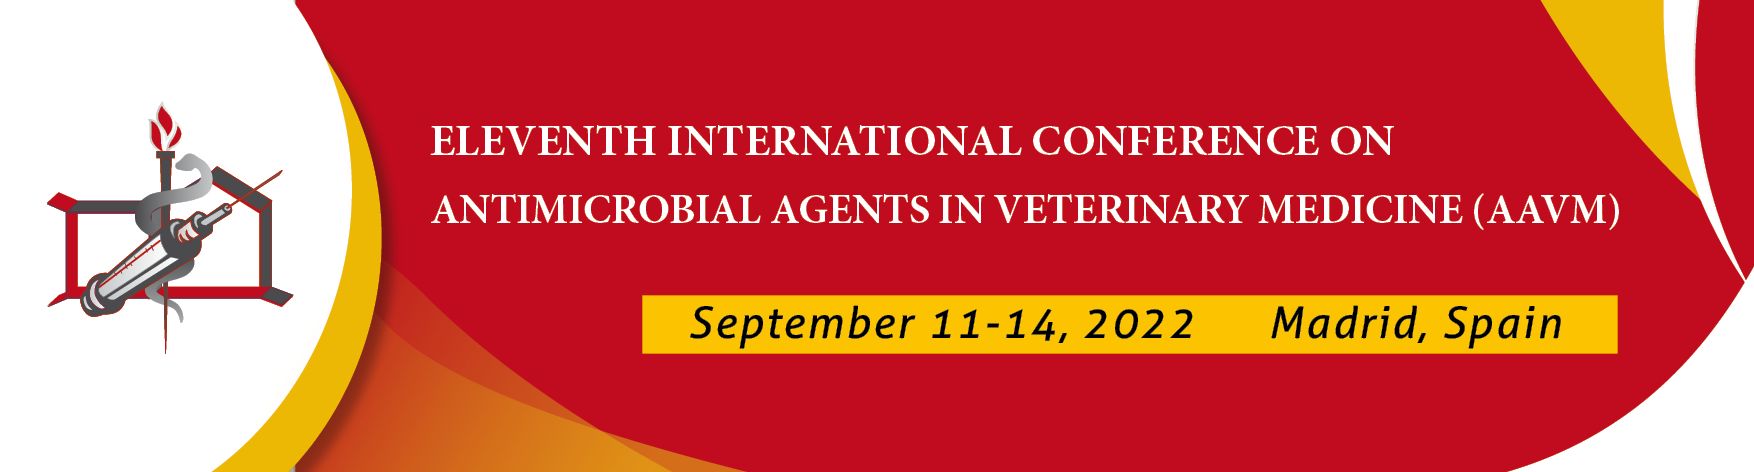 International Conference on Antimicrobial Agents in Veterinary Medicine (AAVM)